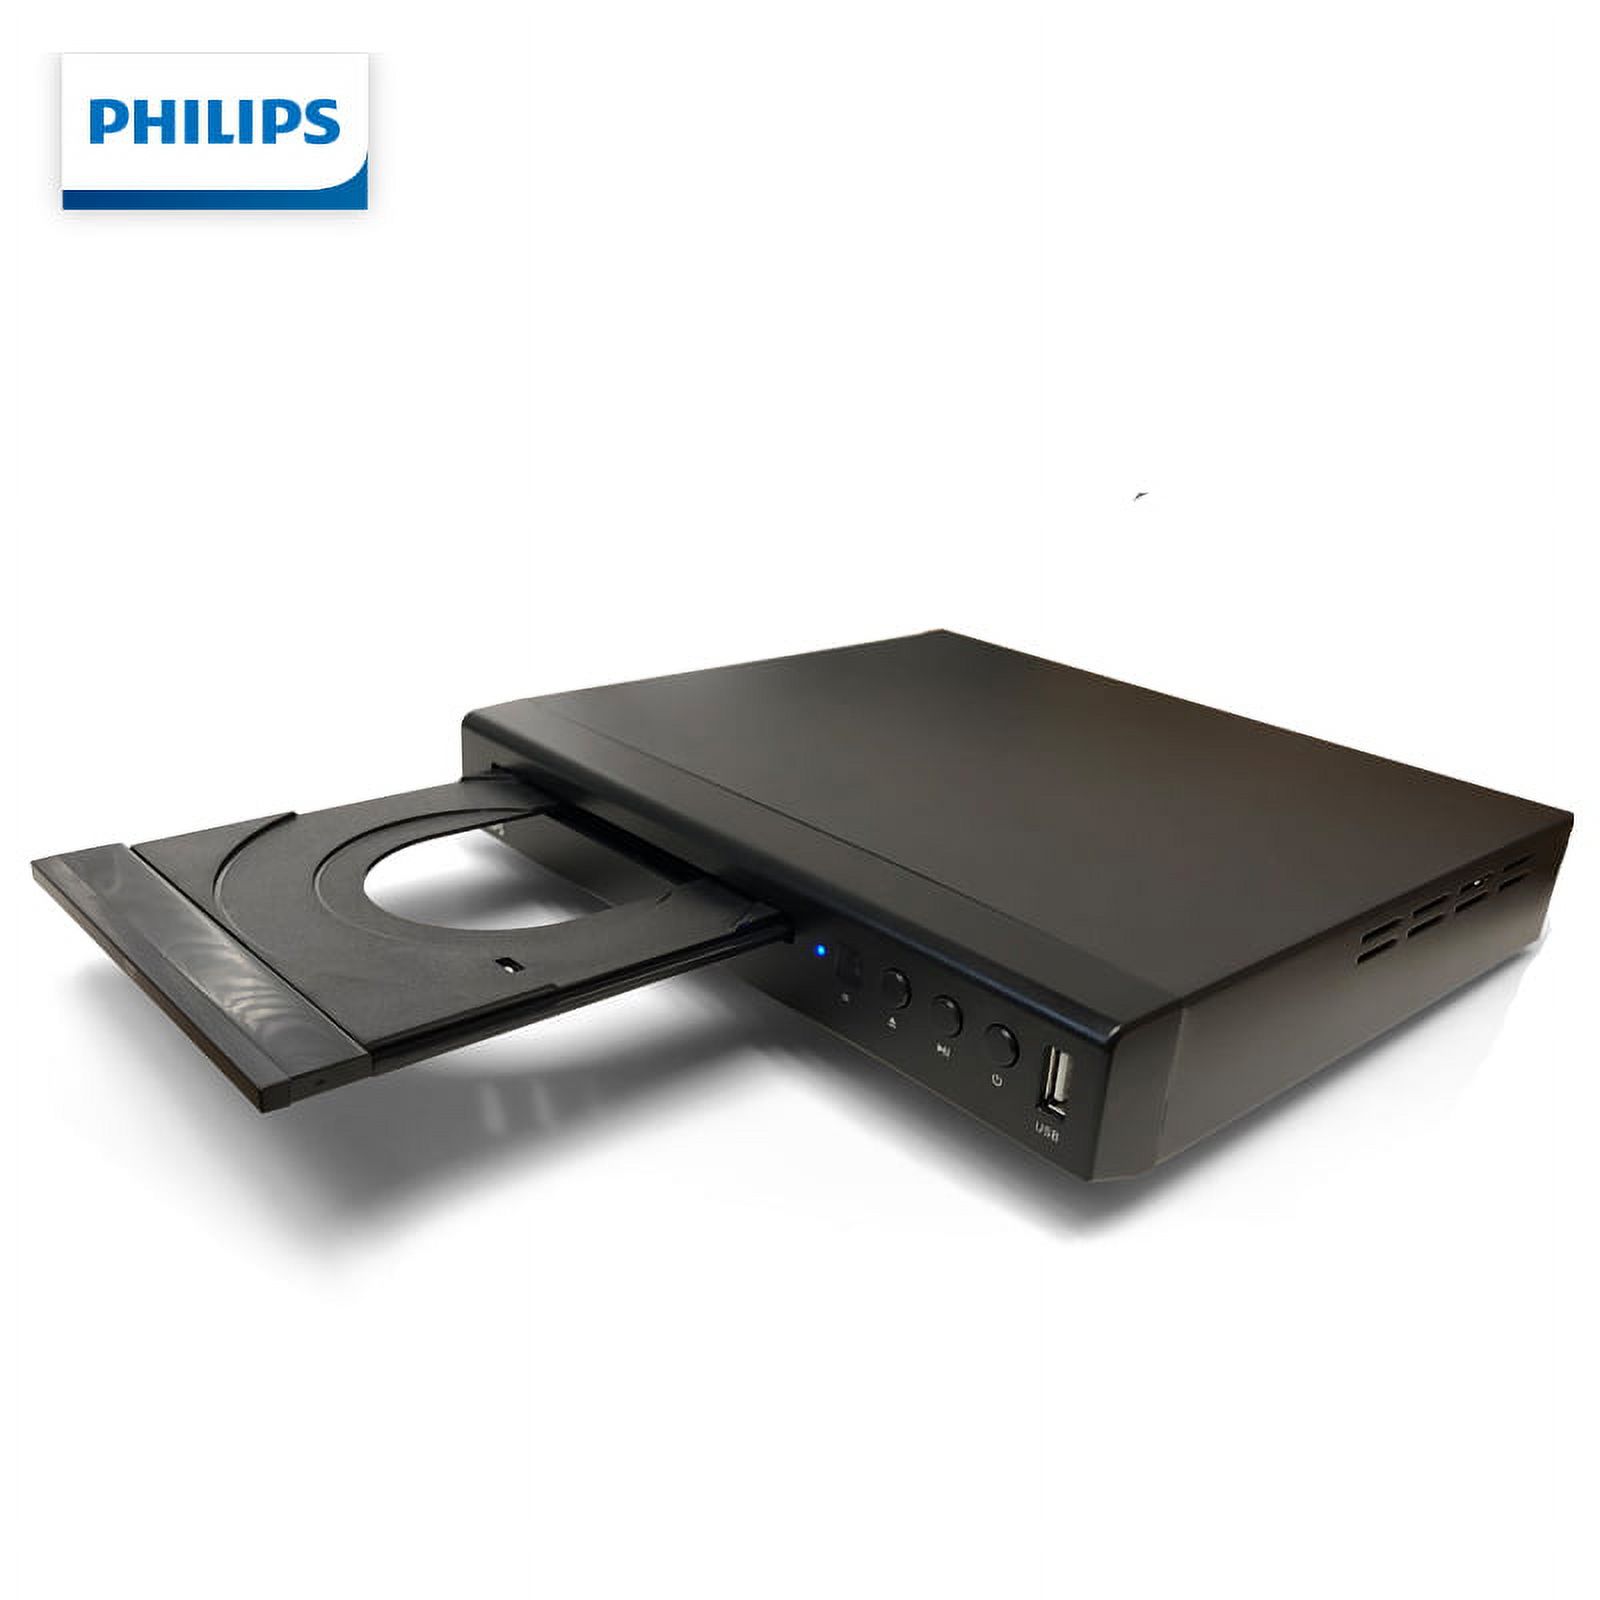 Philips TAEP200 Multi Region Code Free 1080P HDMI Upscaling DVD Player W/ USB Input 110-240 Volt - image 4 of 5